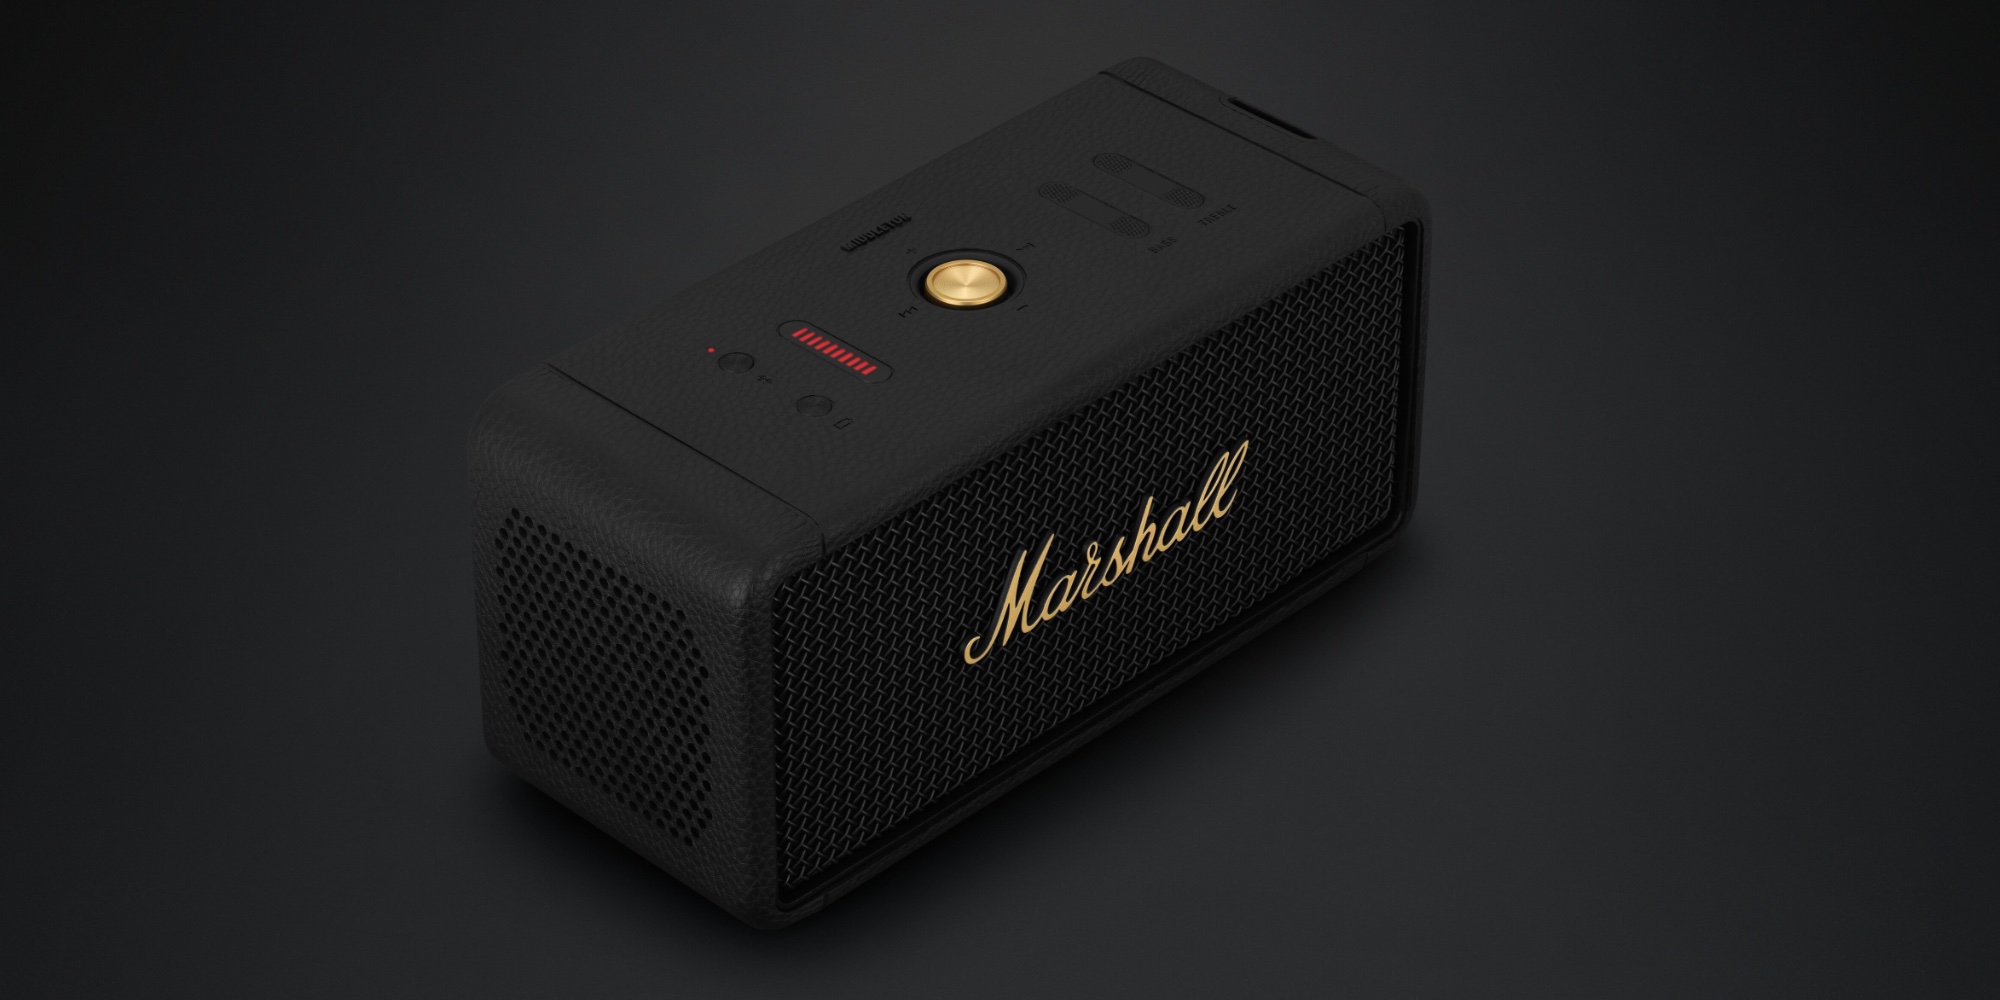 Marshall's new Middleton is its most capable portable Bluetooth speaker yet